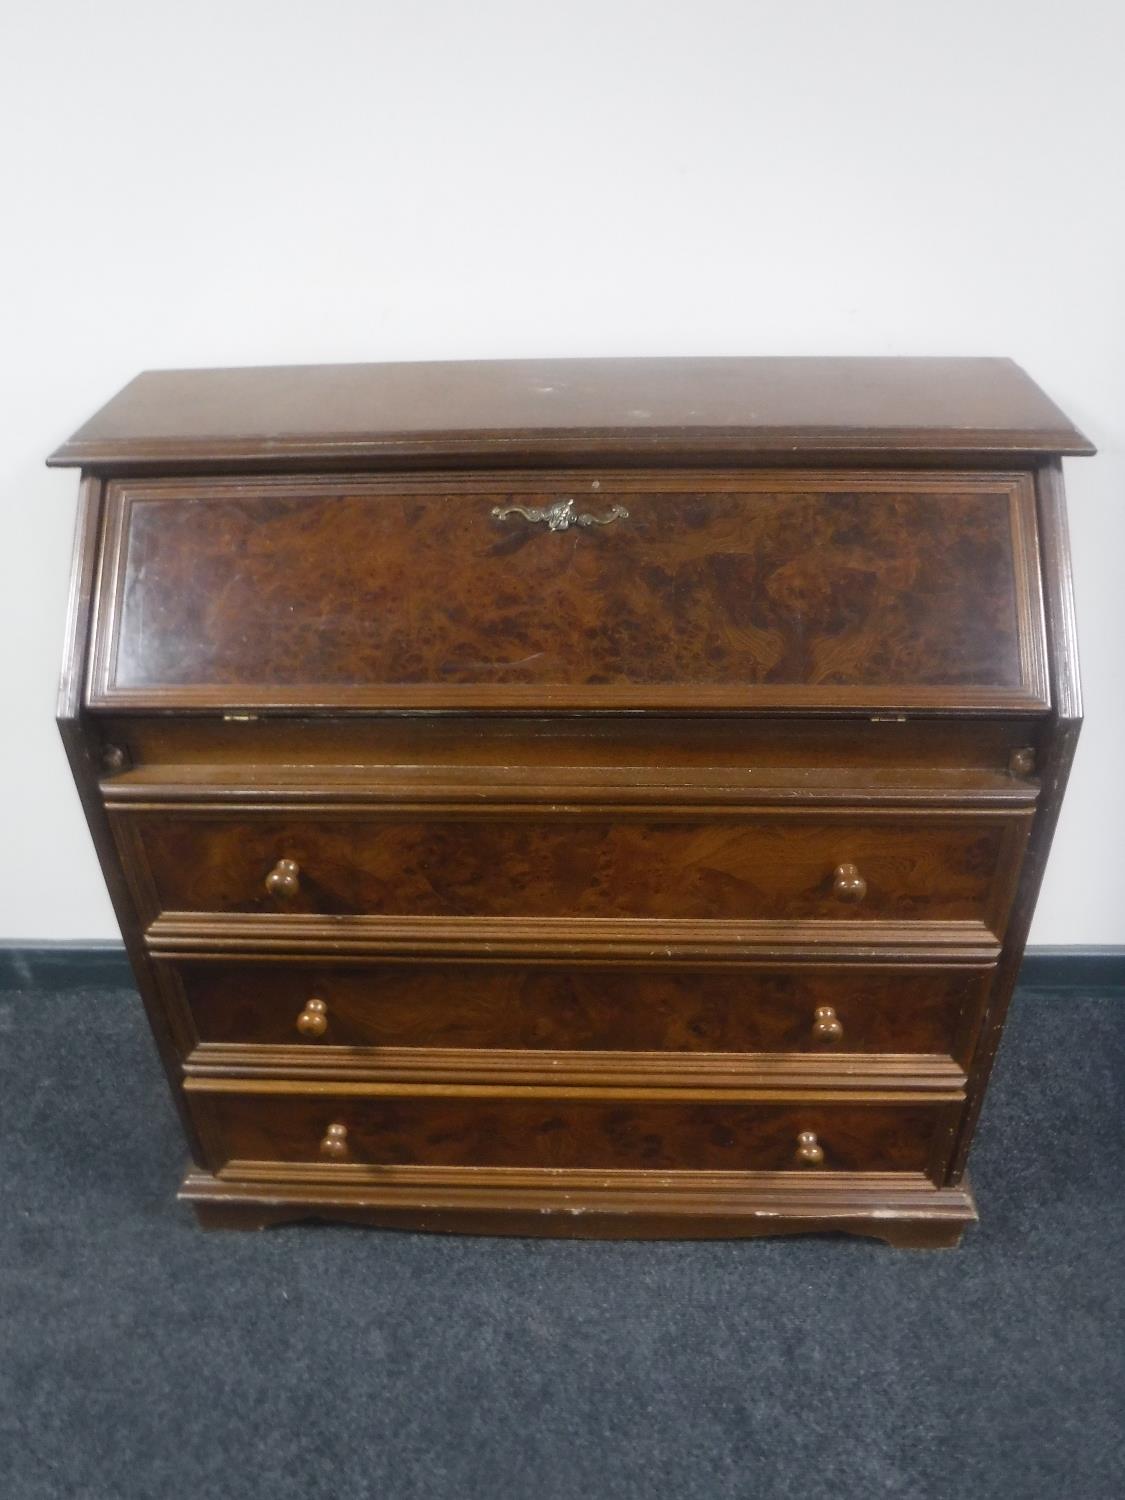 A continental bureau in a walnut finish together with a mahogany double door cabinet fitted a